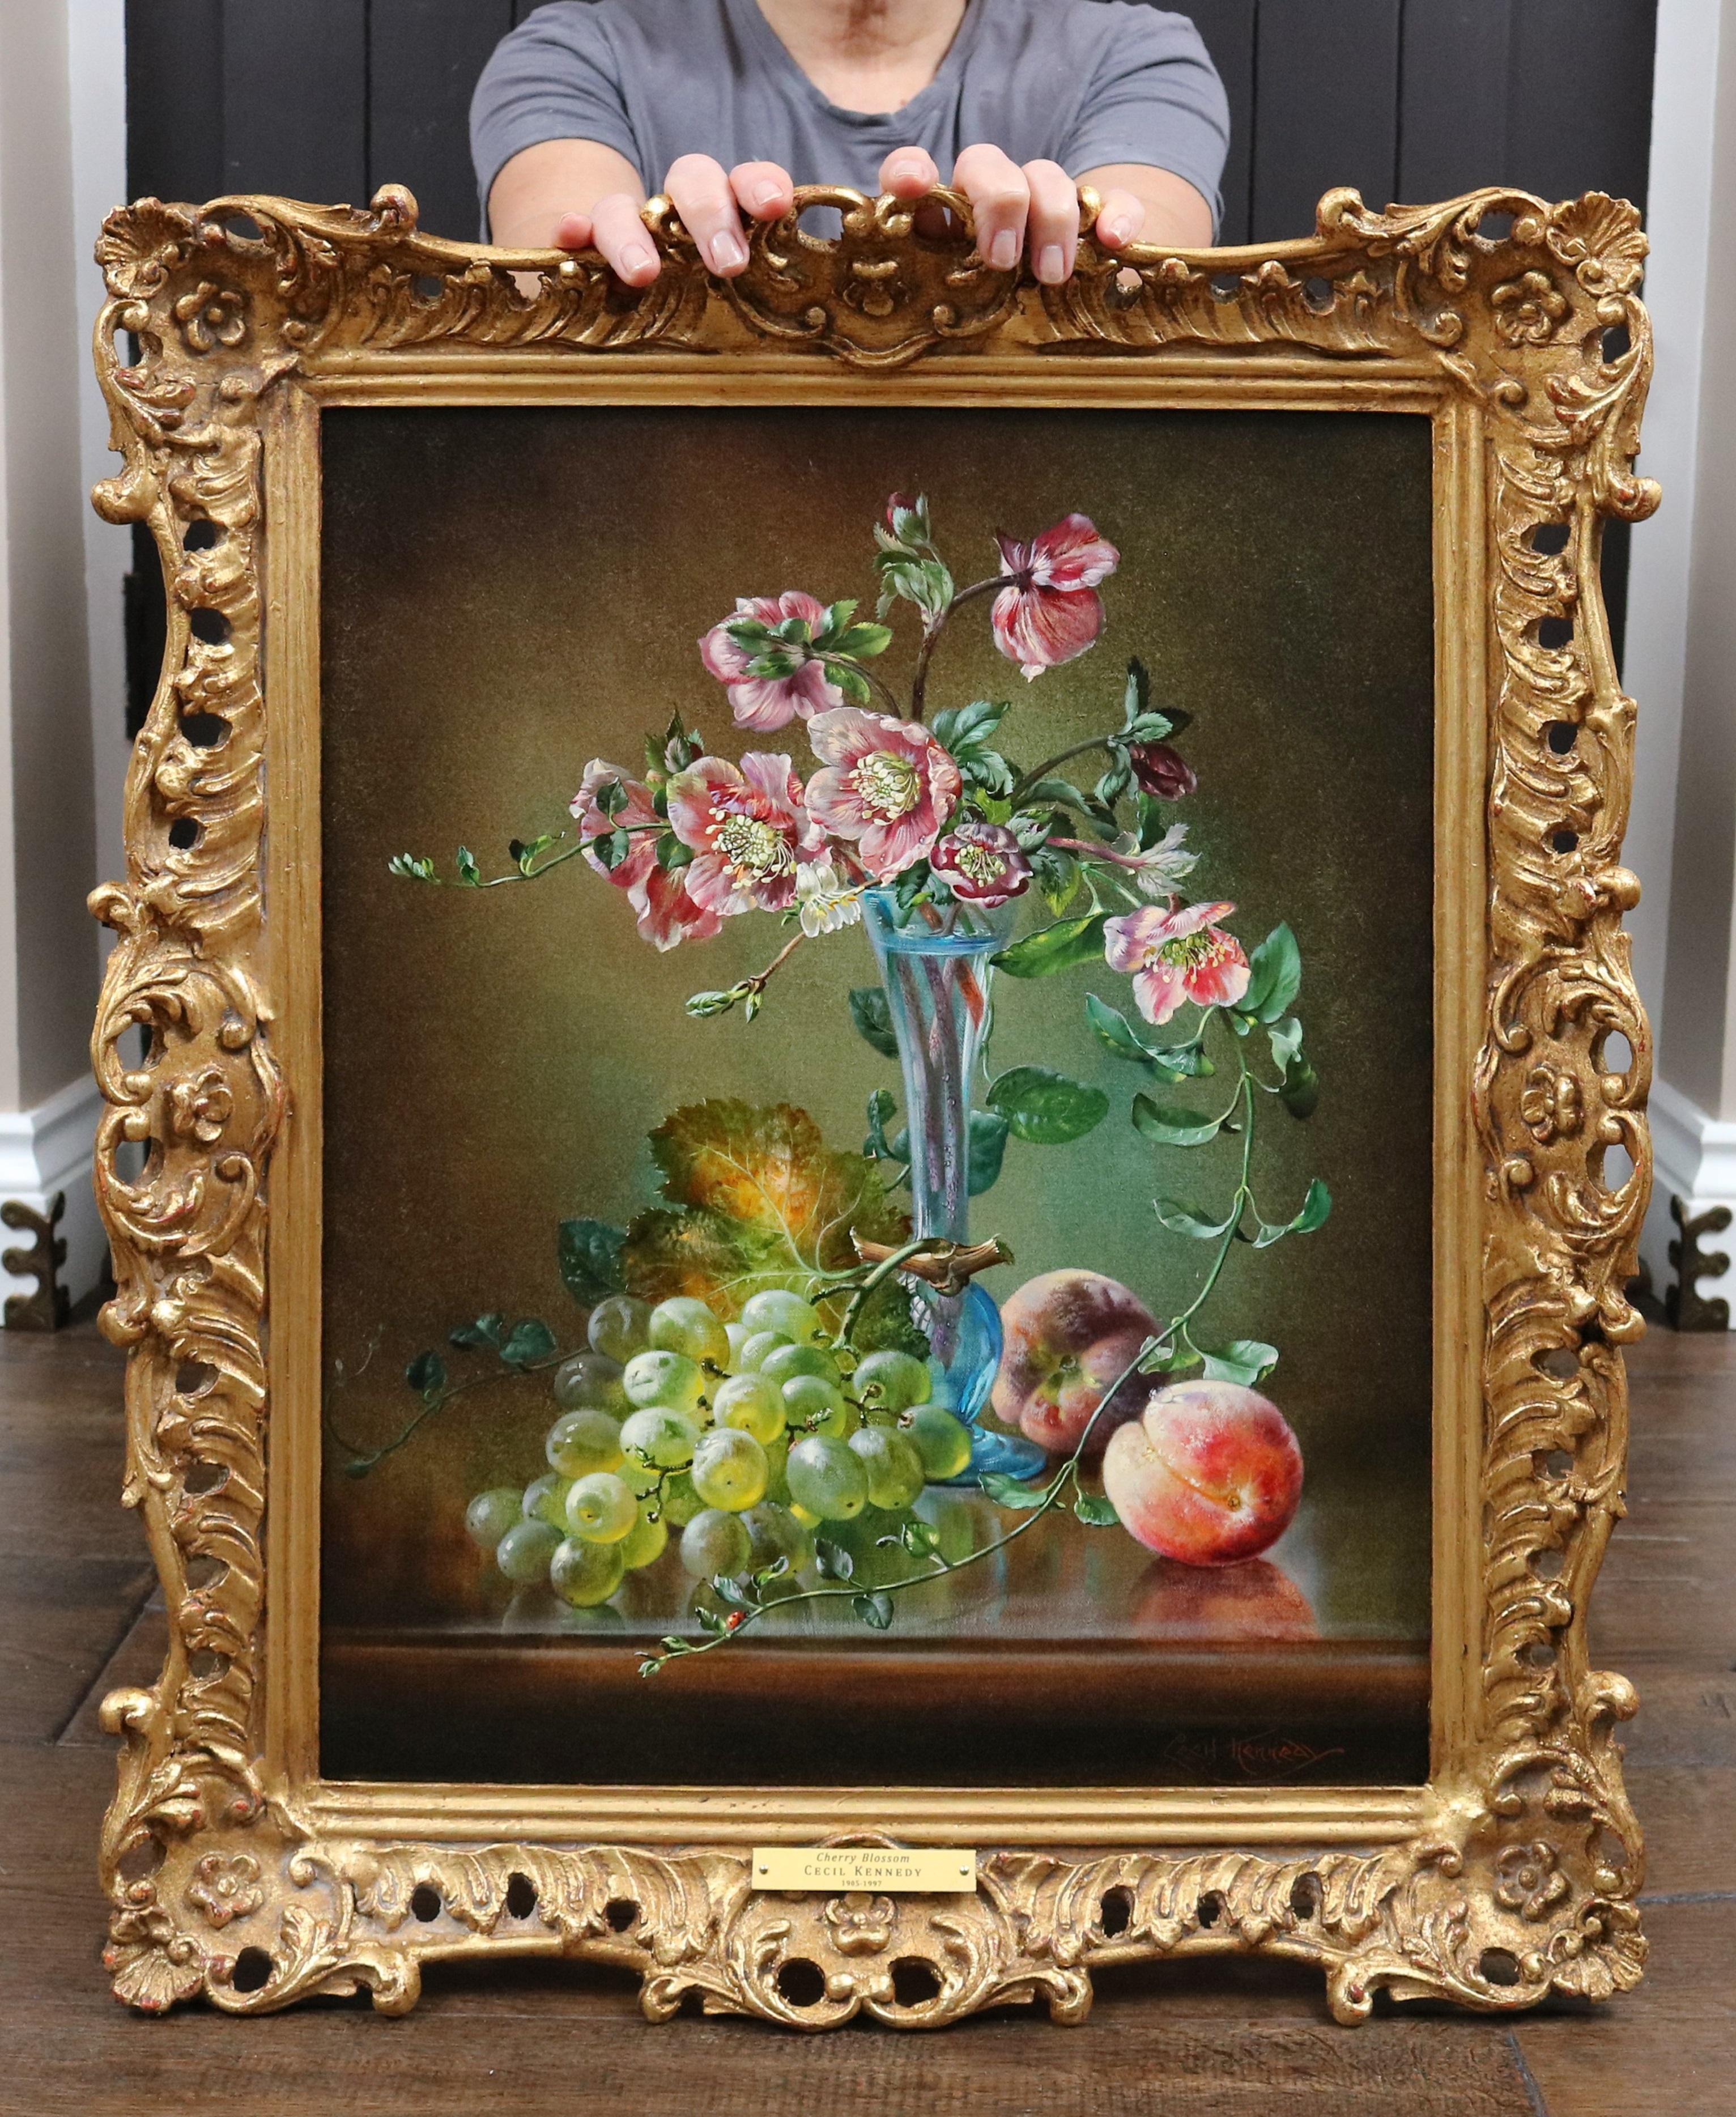 Cherry Blossom - English Floral Still Life Oil Painting with Grapes and Peaches